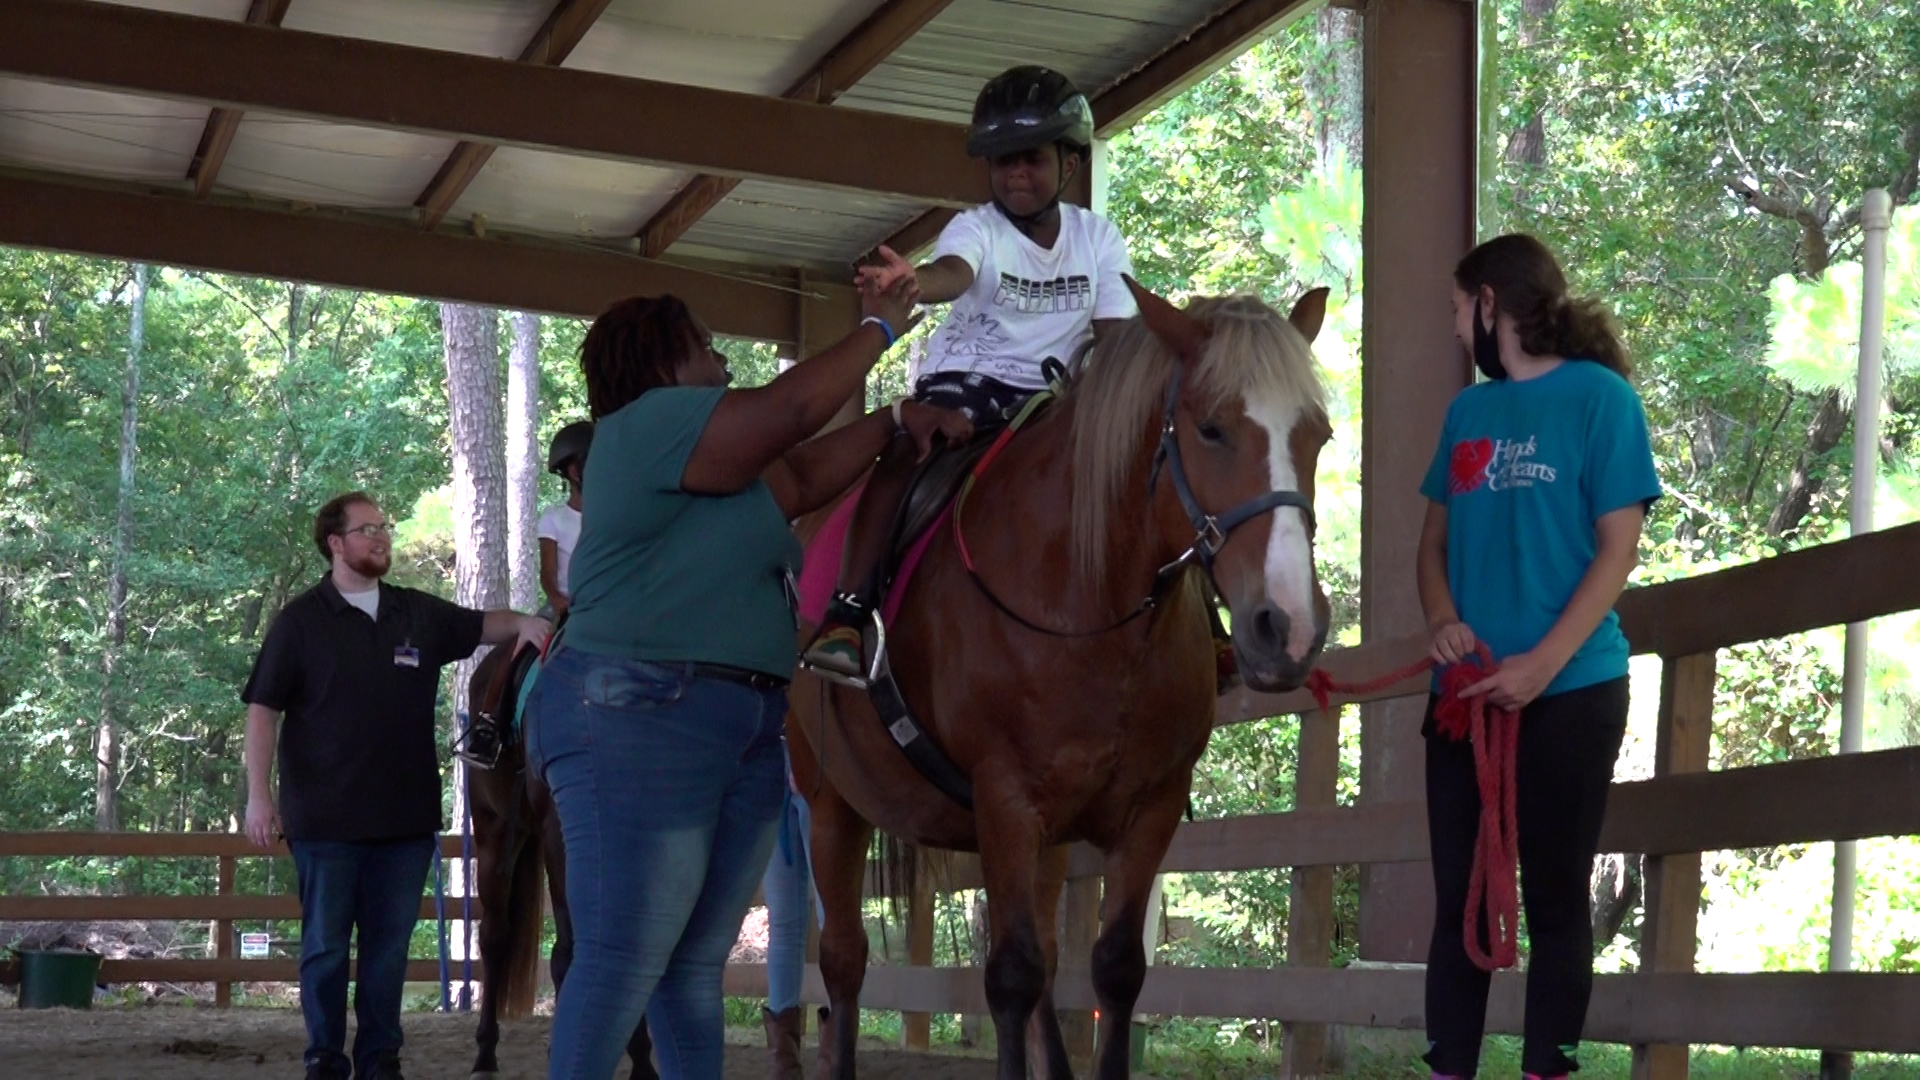 Stepping into the stirrup: Keiser University Tallahassee OTA students gain hands-on learning of equine therapy